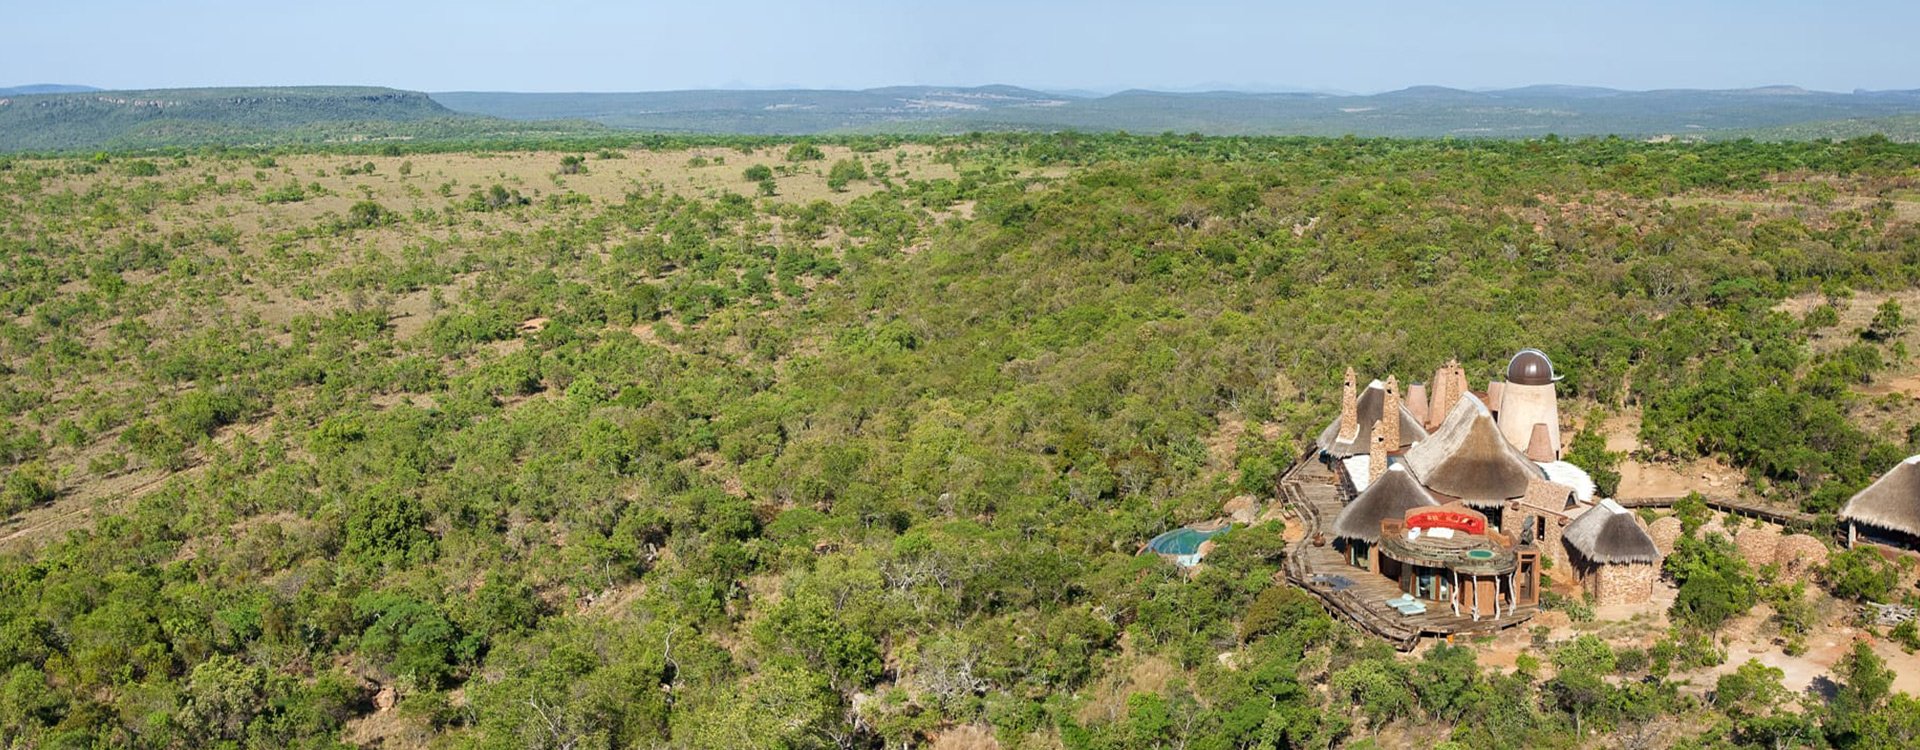 Leobo-Private-Reserve_Aerial-View_Forest